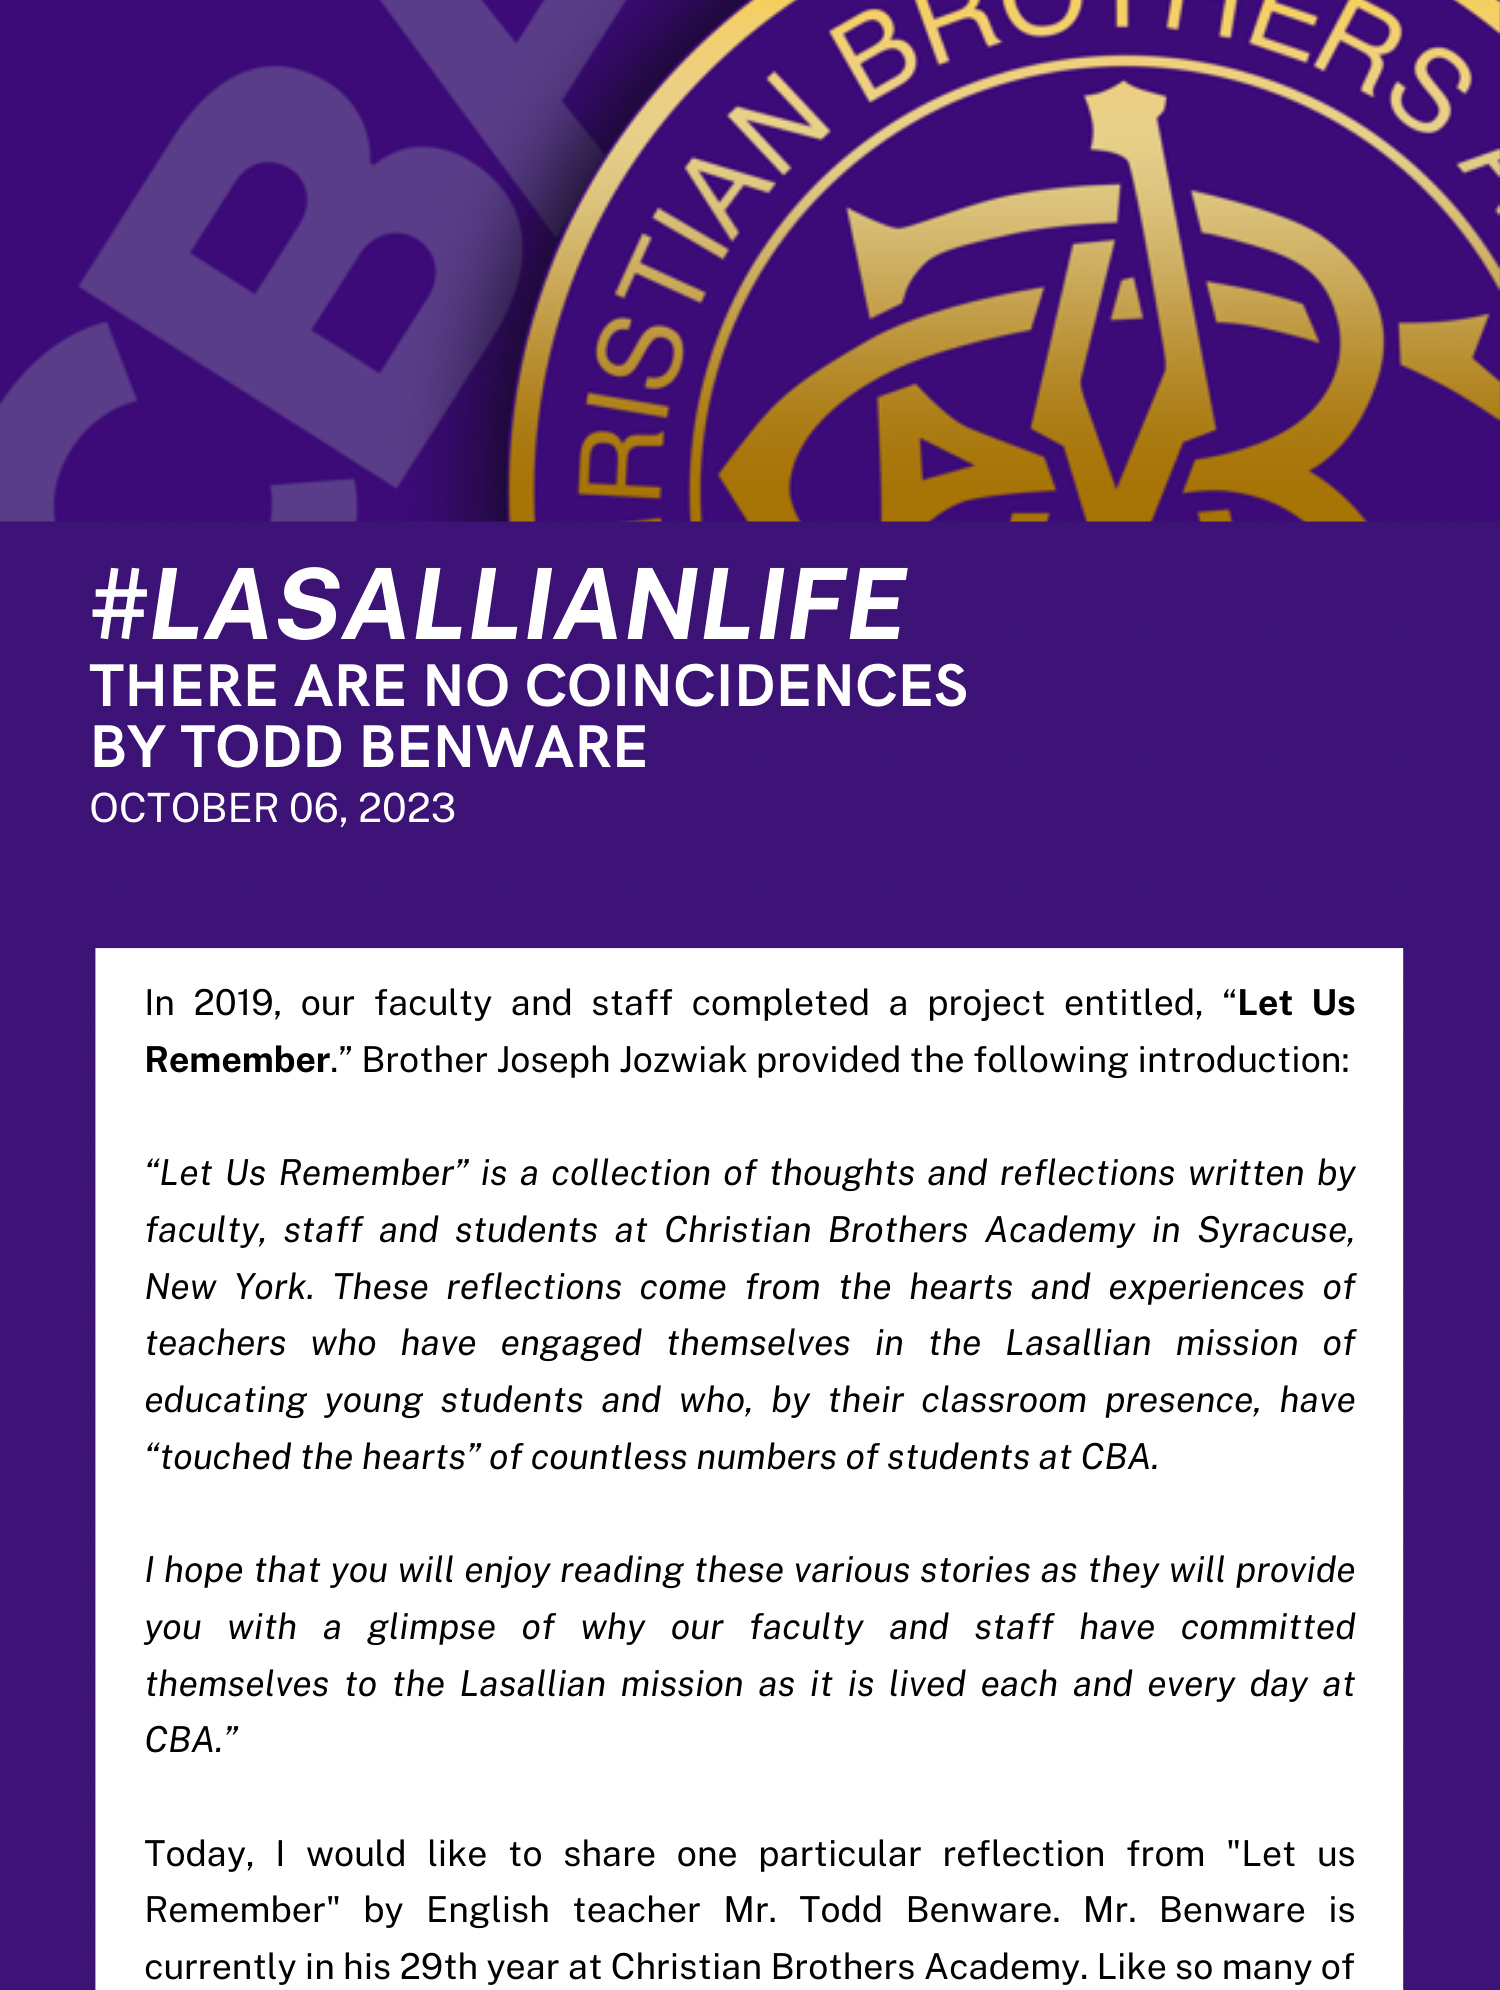 #LasallianLife : There are No Coincidences